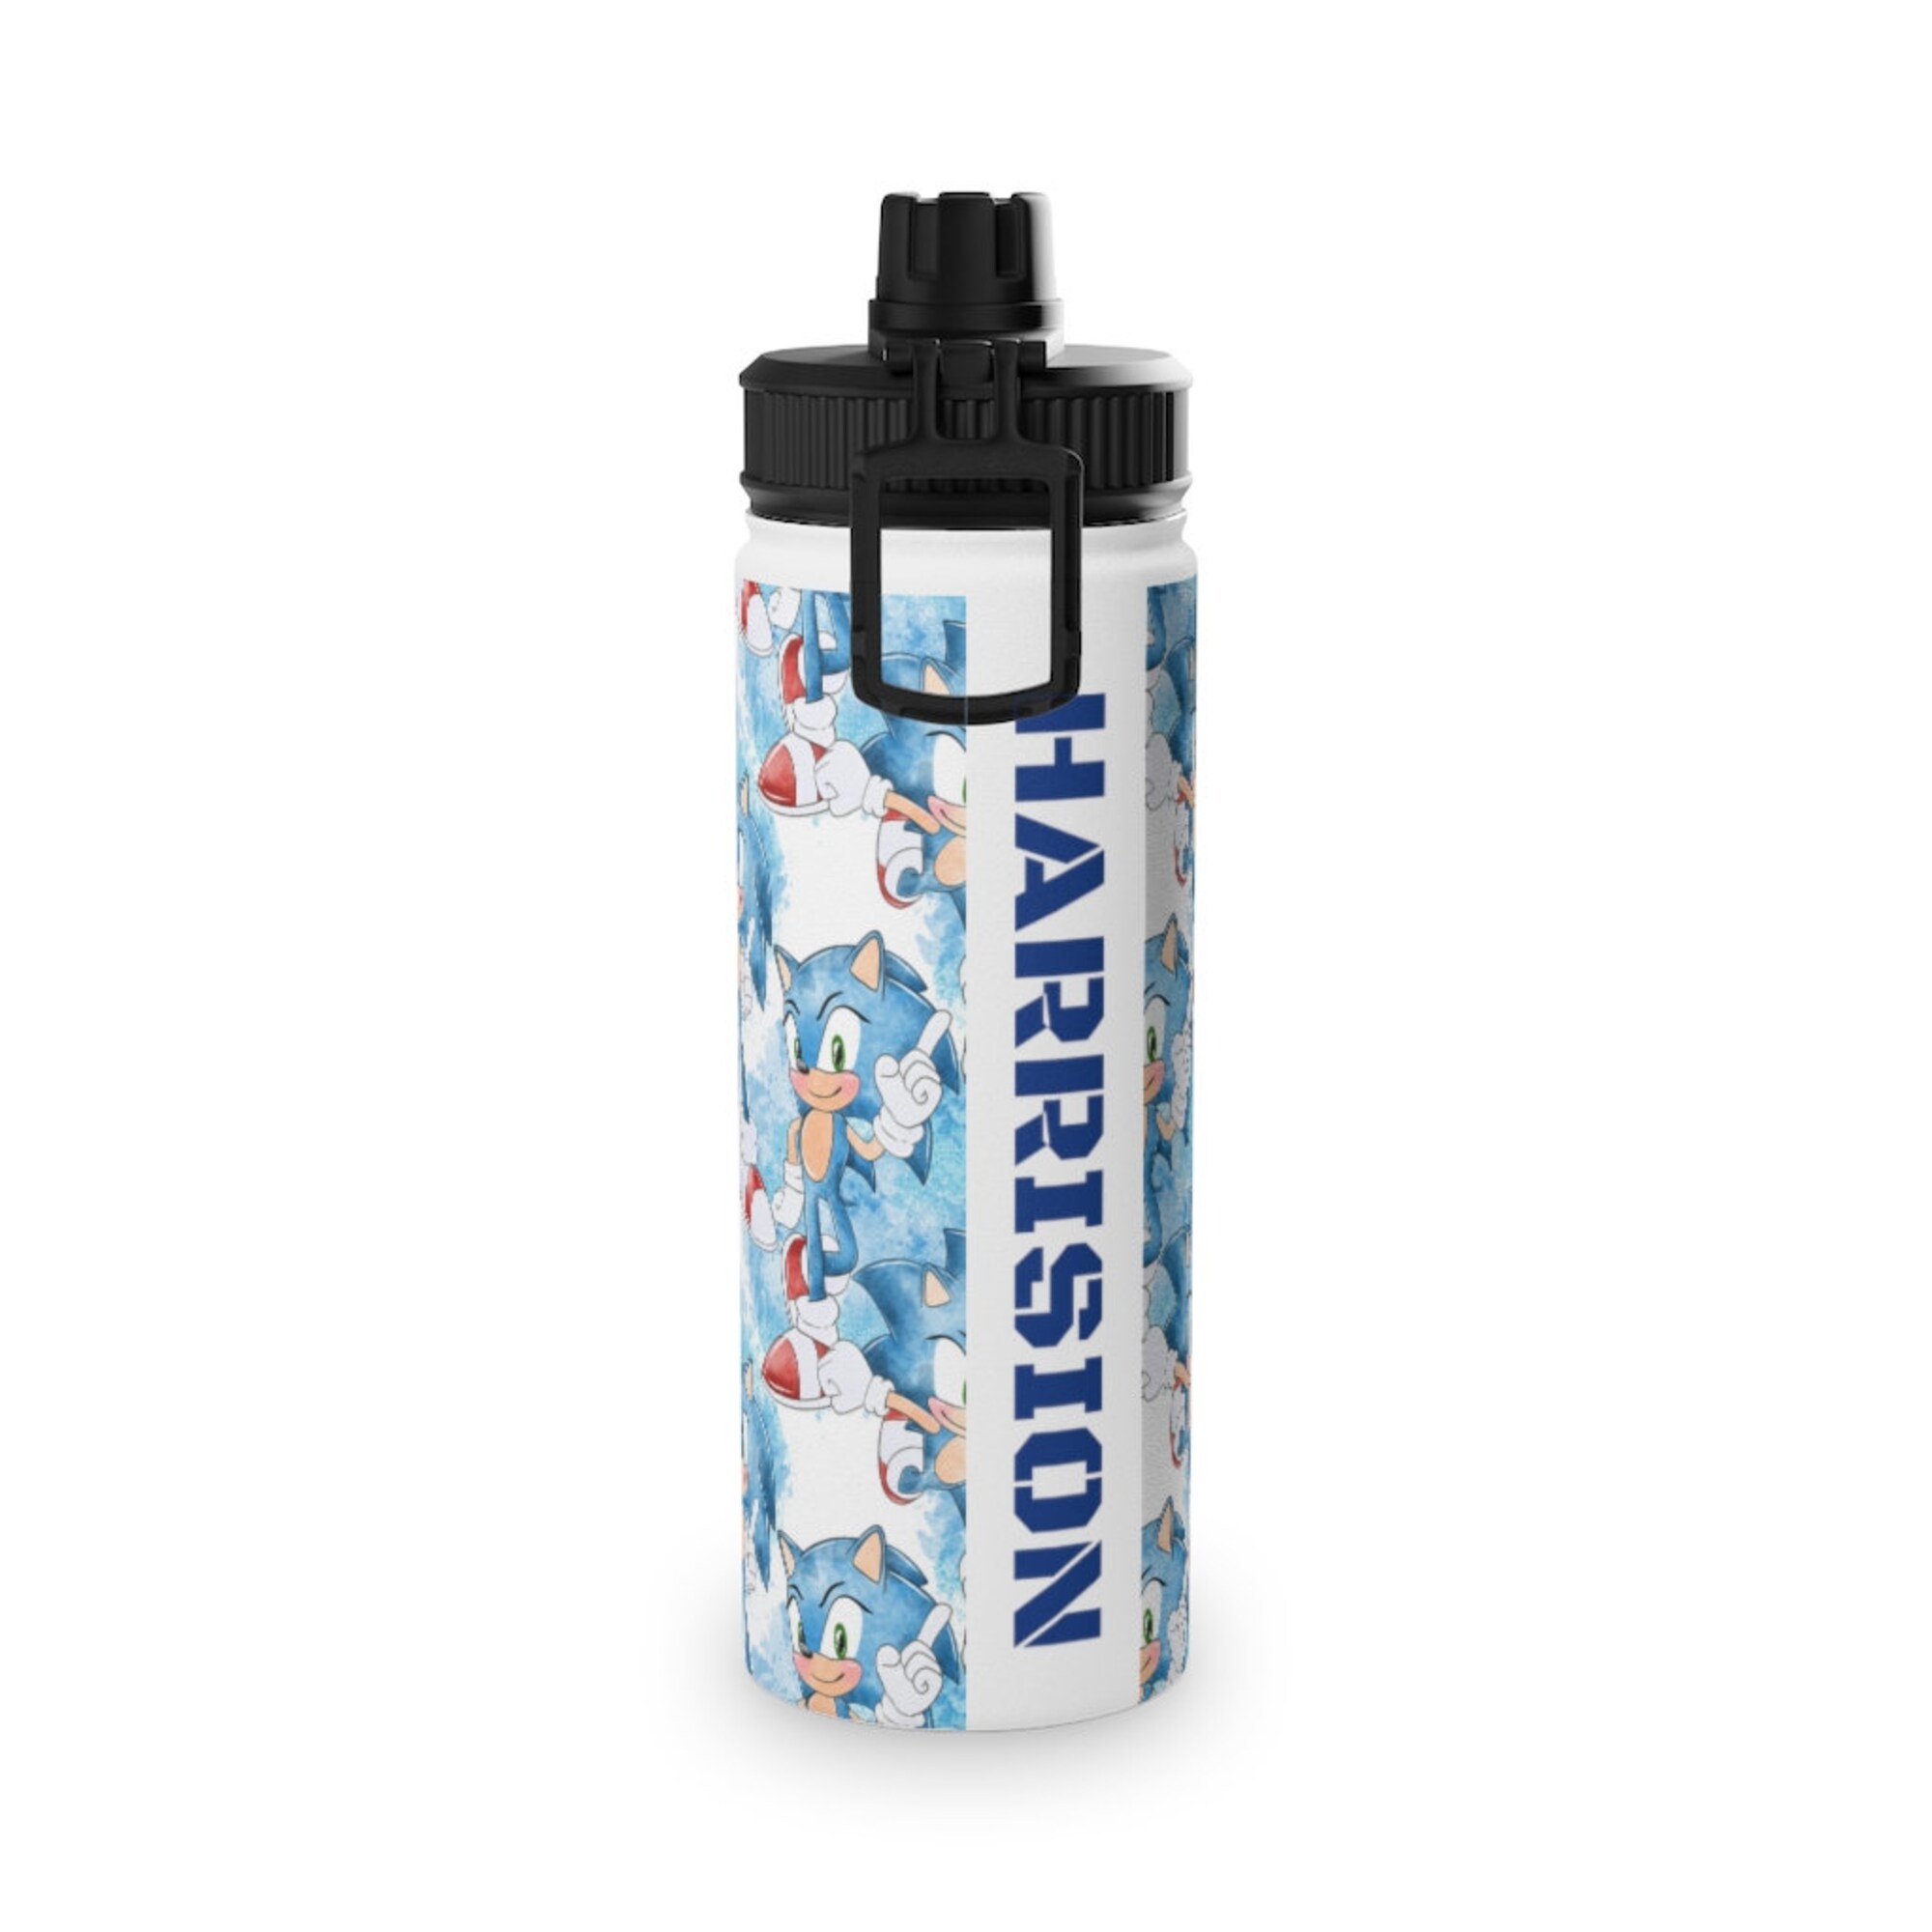 Sonic The Hedgehog Stainless Steel Water Bottle, Sports Lid